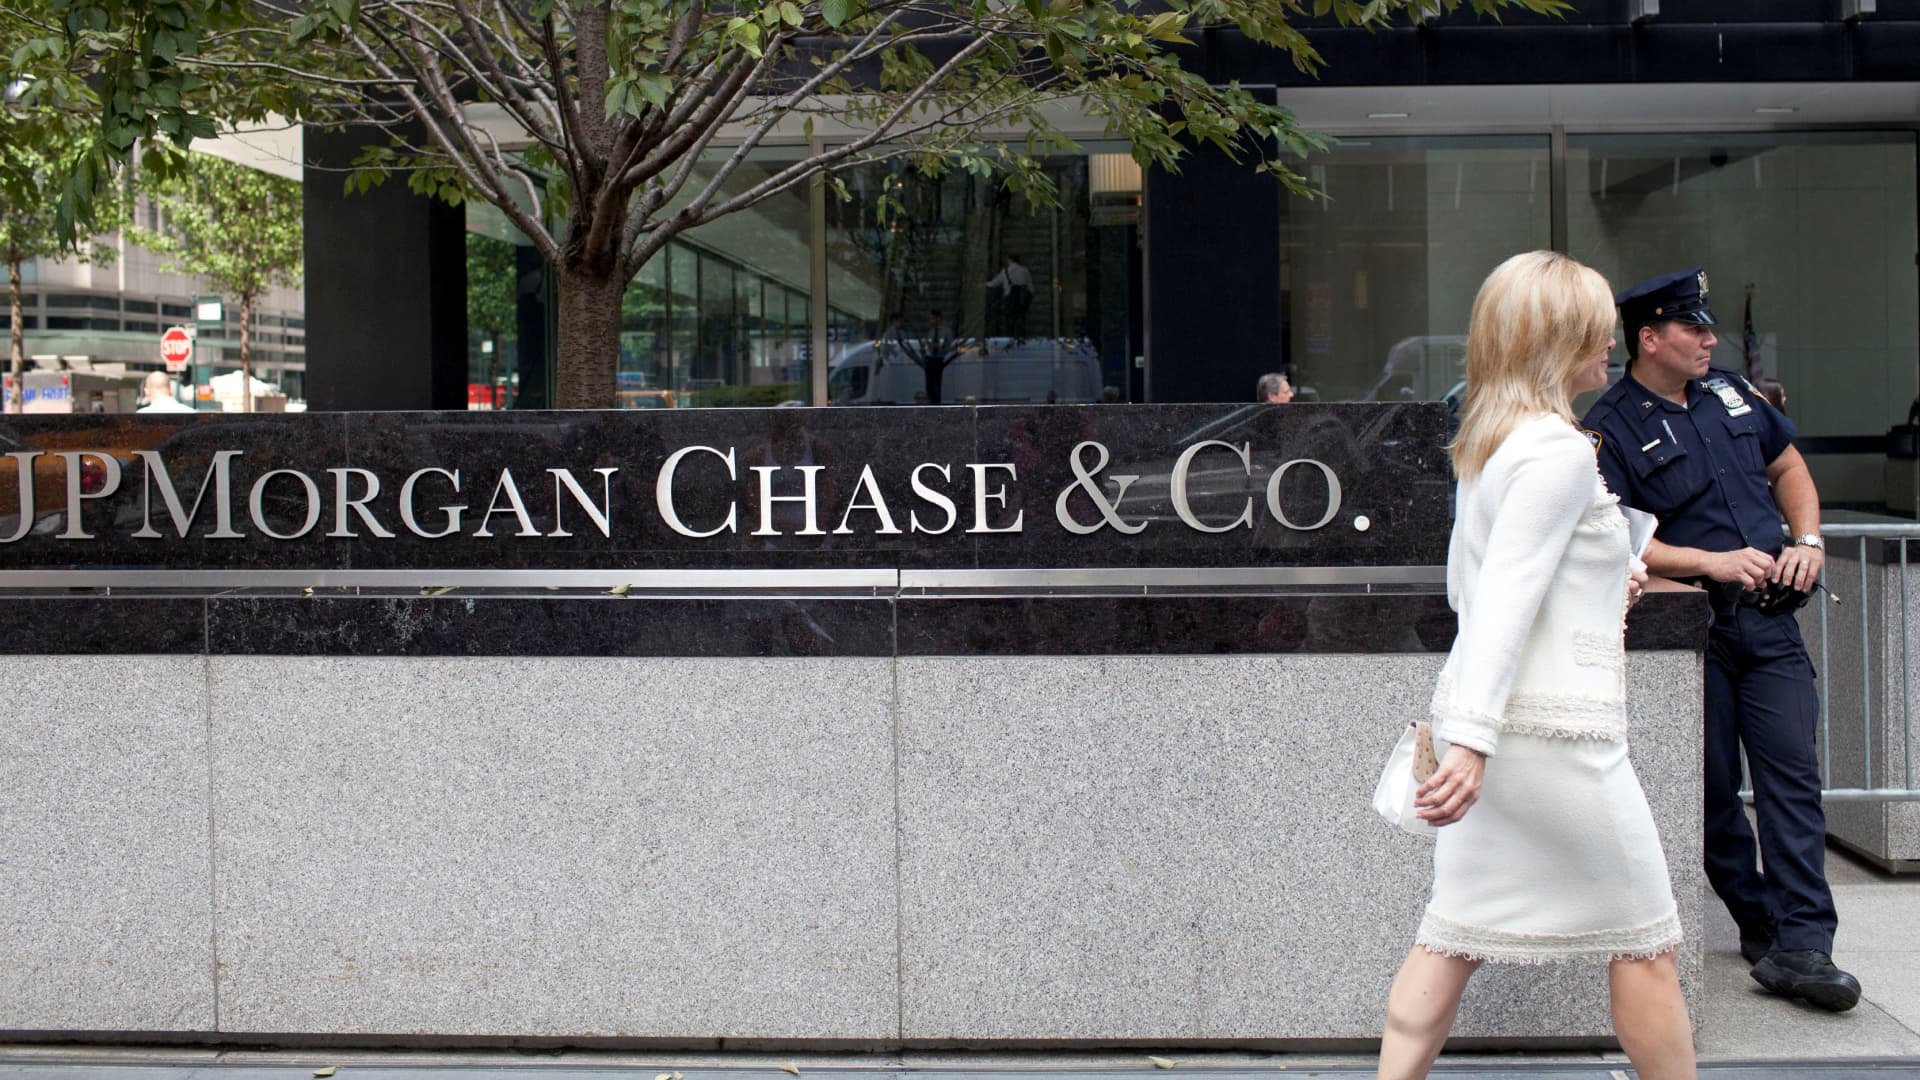 Citi upgrades JPMorgan Chase to buy, says stock is at an attractive entry point